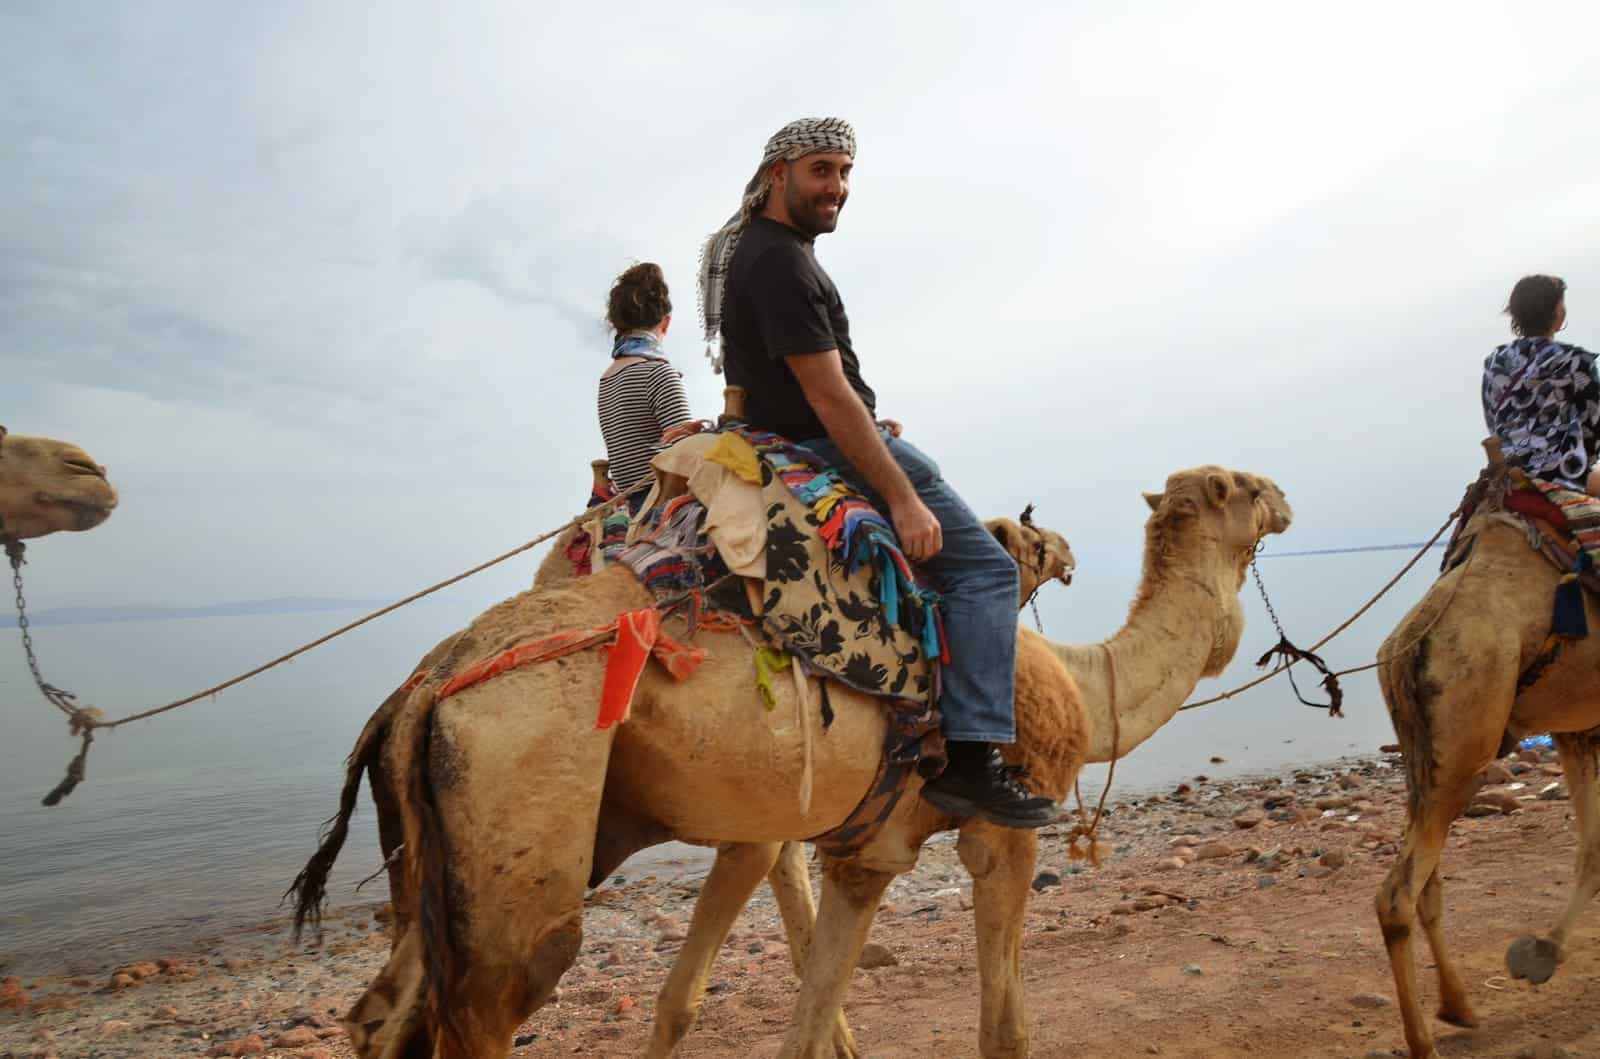 Me riding a camel on the beach at Abu Galom in Sinai, Egypt